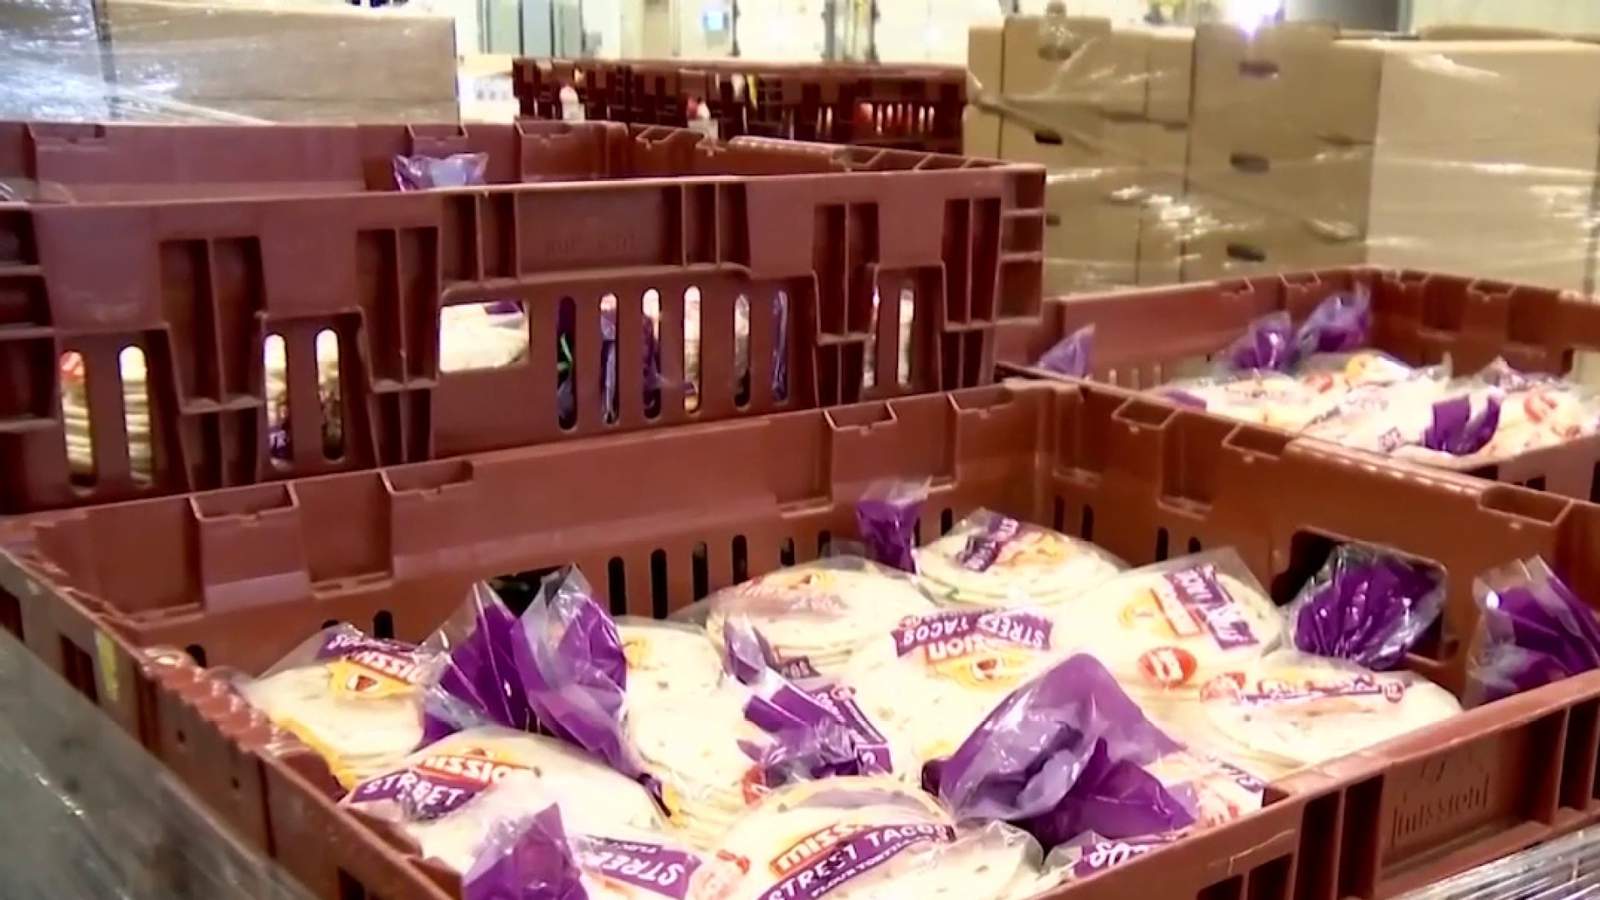 Mission Foods donates thousands of tortillas to San Antonio Food Bank